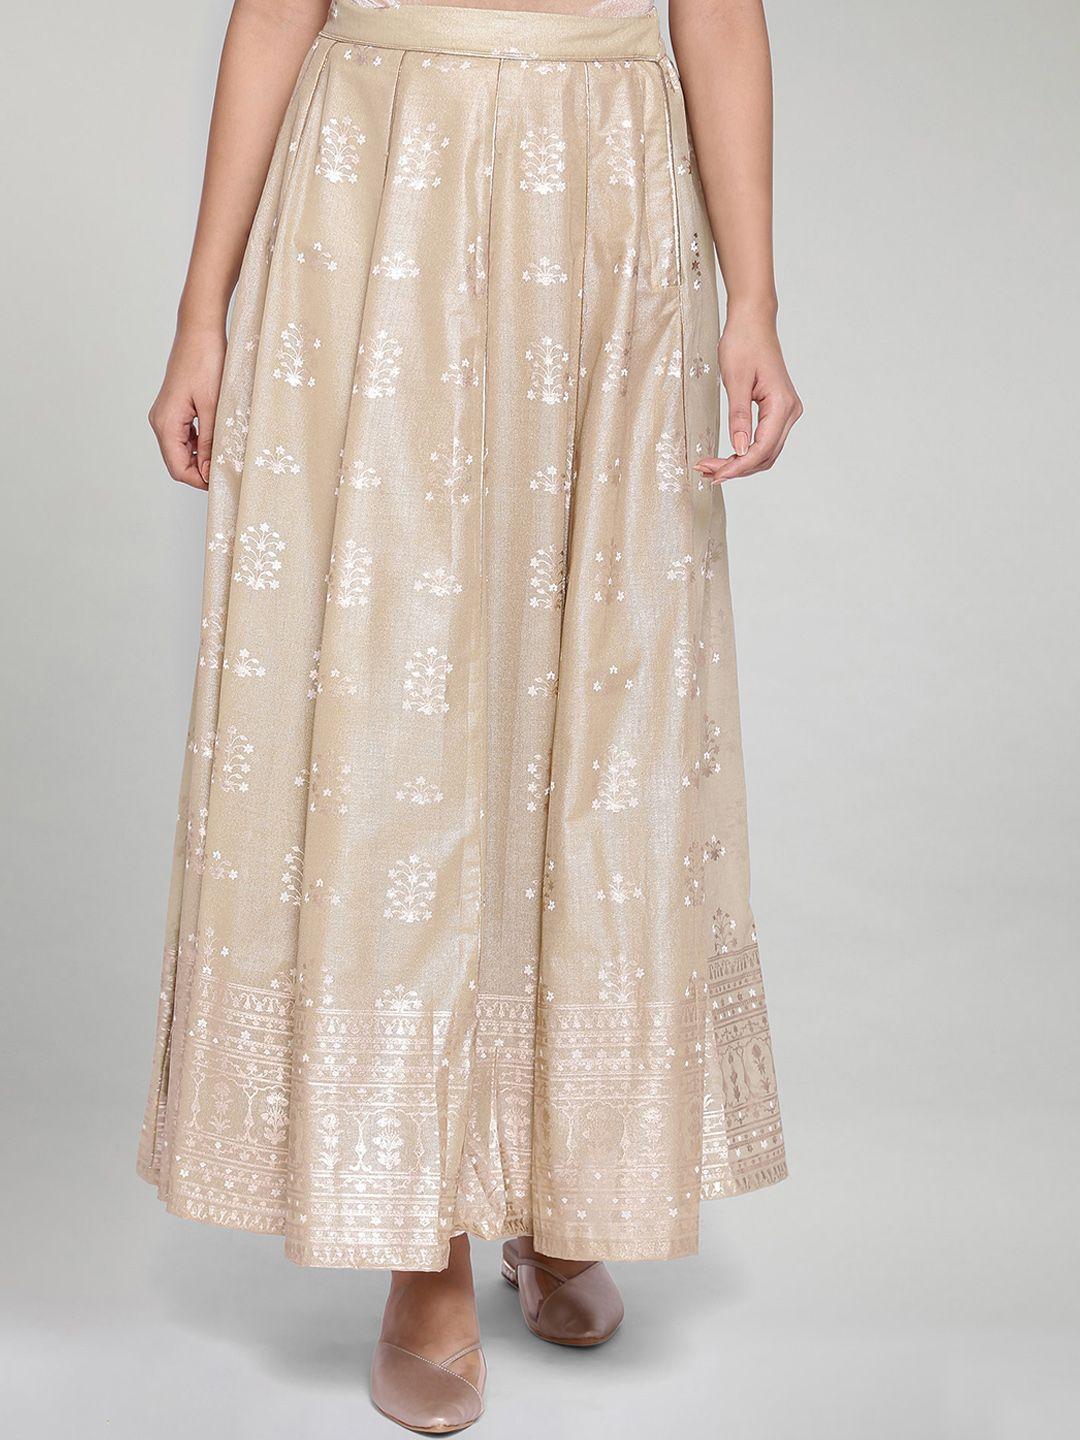 w-women-golden-floral-printed-flared-maxi-skirts